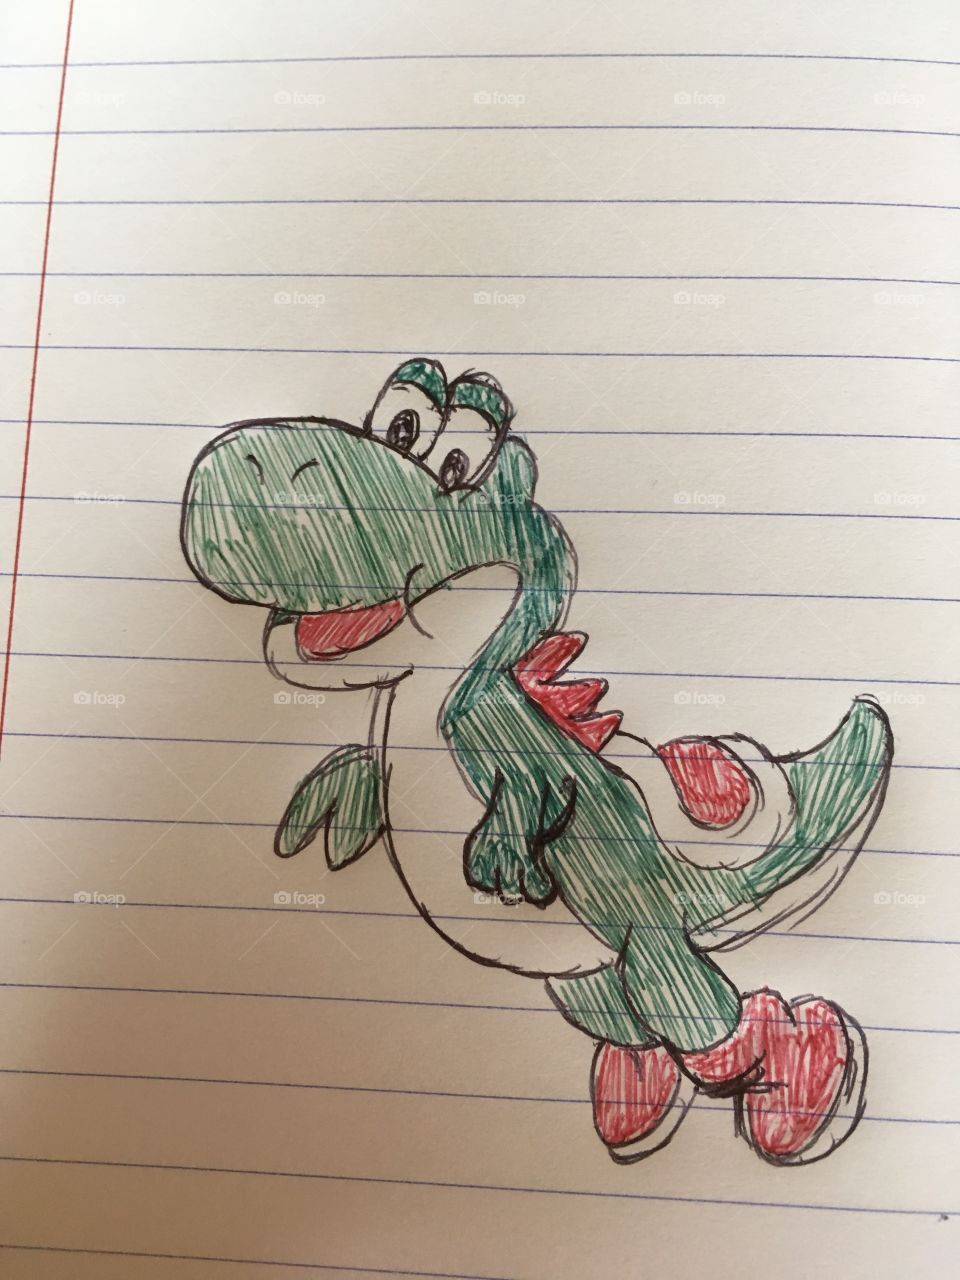 A doodle of yoshi from super mario in a copybook